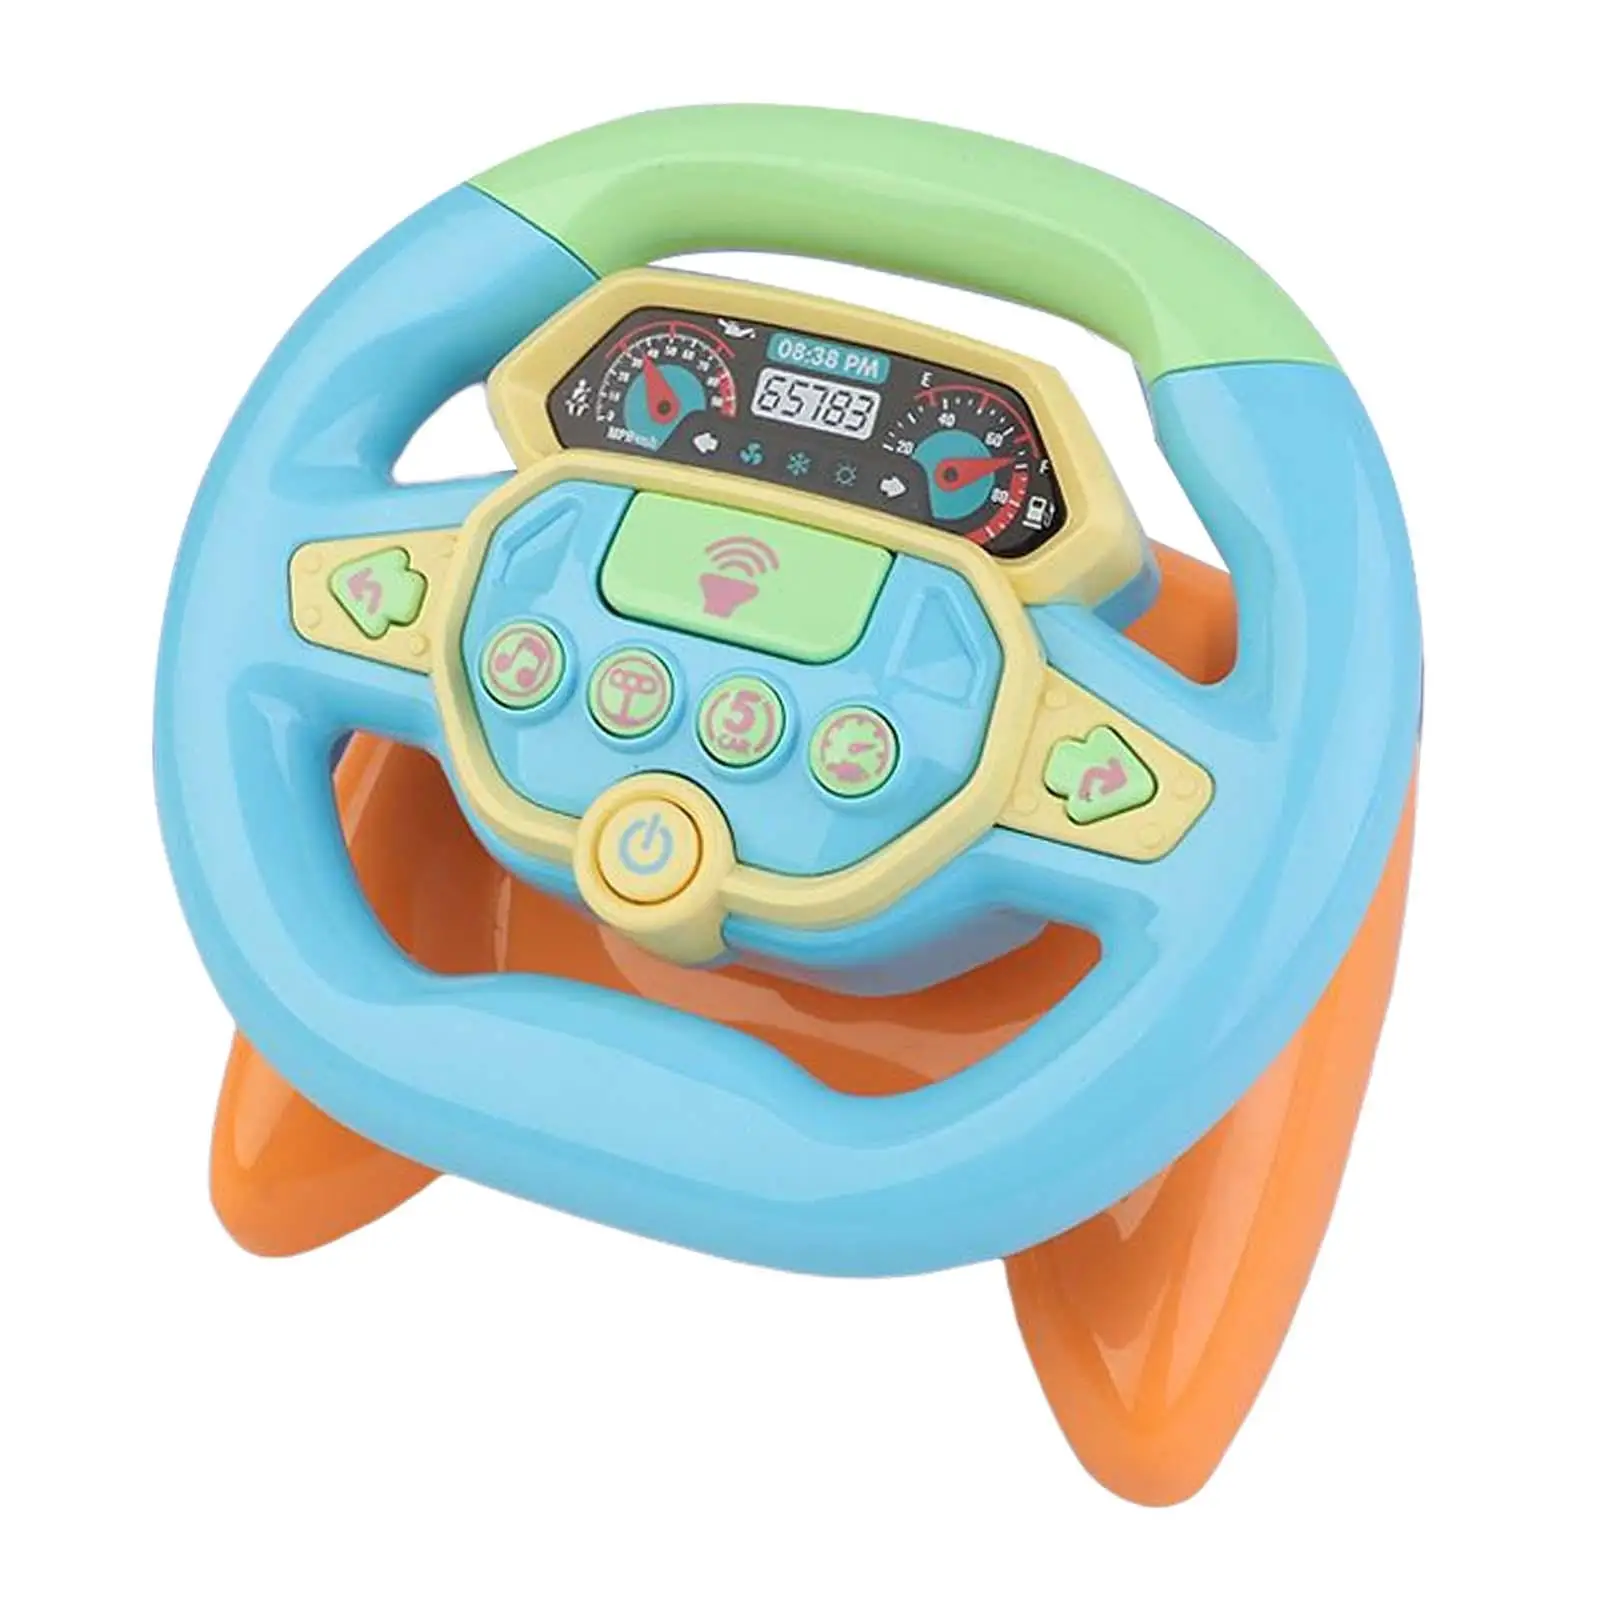 Cars Simulation Steering Wheel Toy Educational Learning Toy Pretend Play Toy